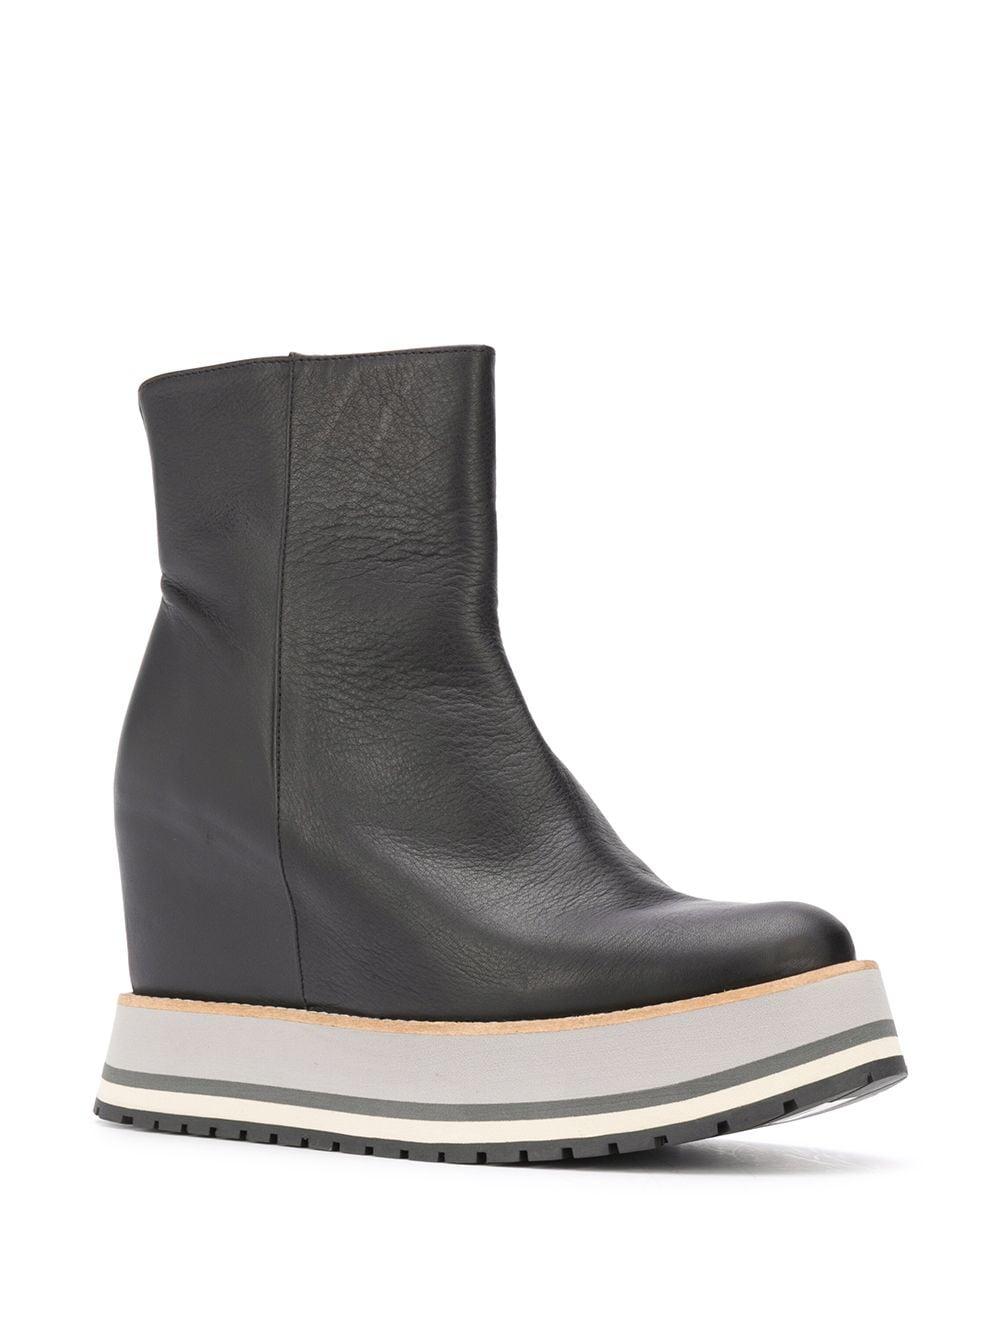 Paloma Barceló Arles Wedge Ankle Boots in Black | Lyst